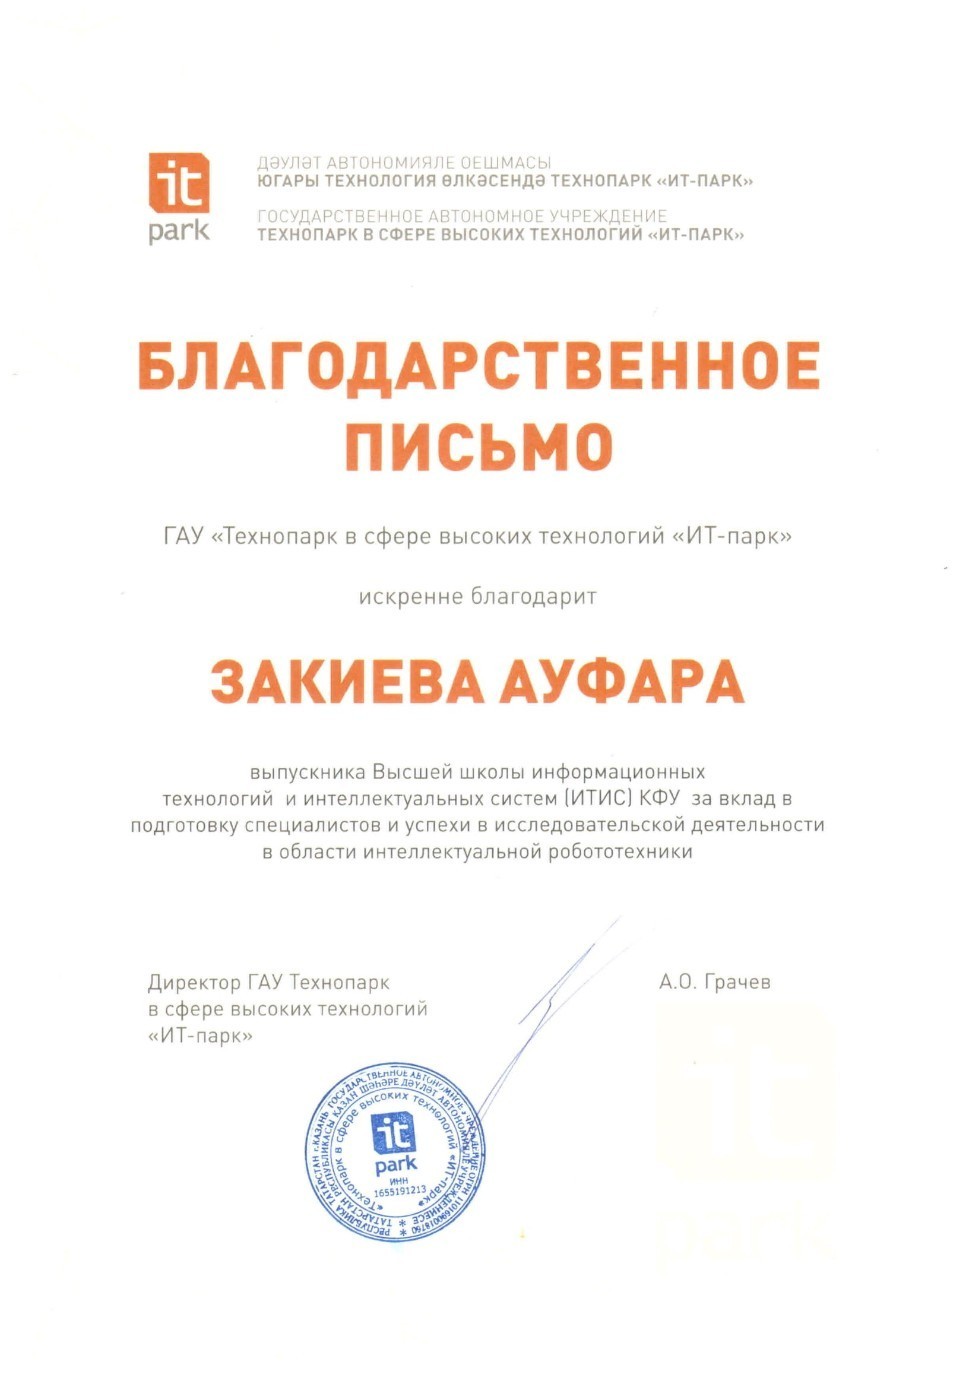 An employee of the Laboratory of intelligent robotic systems was awarded a letter of appreciation ,LIRS, robotics, teaching, IT-Park